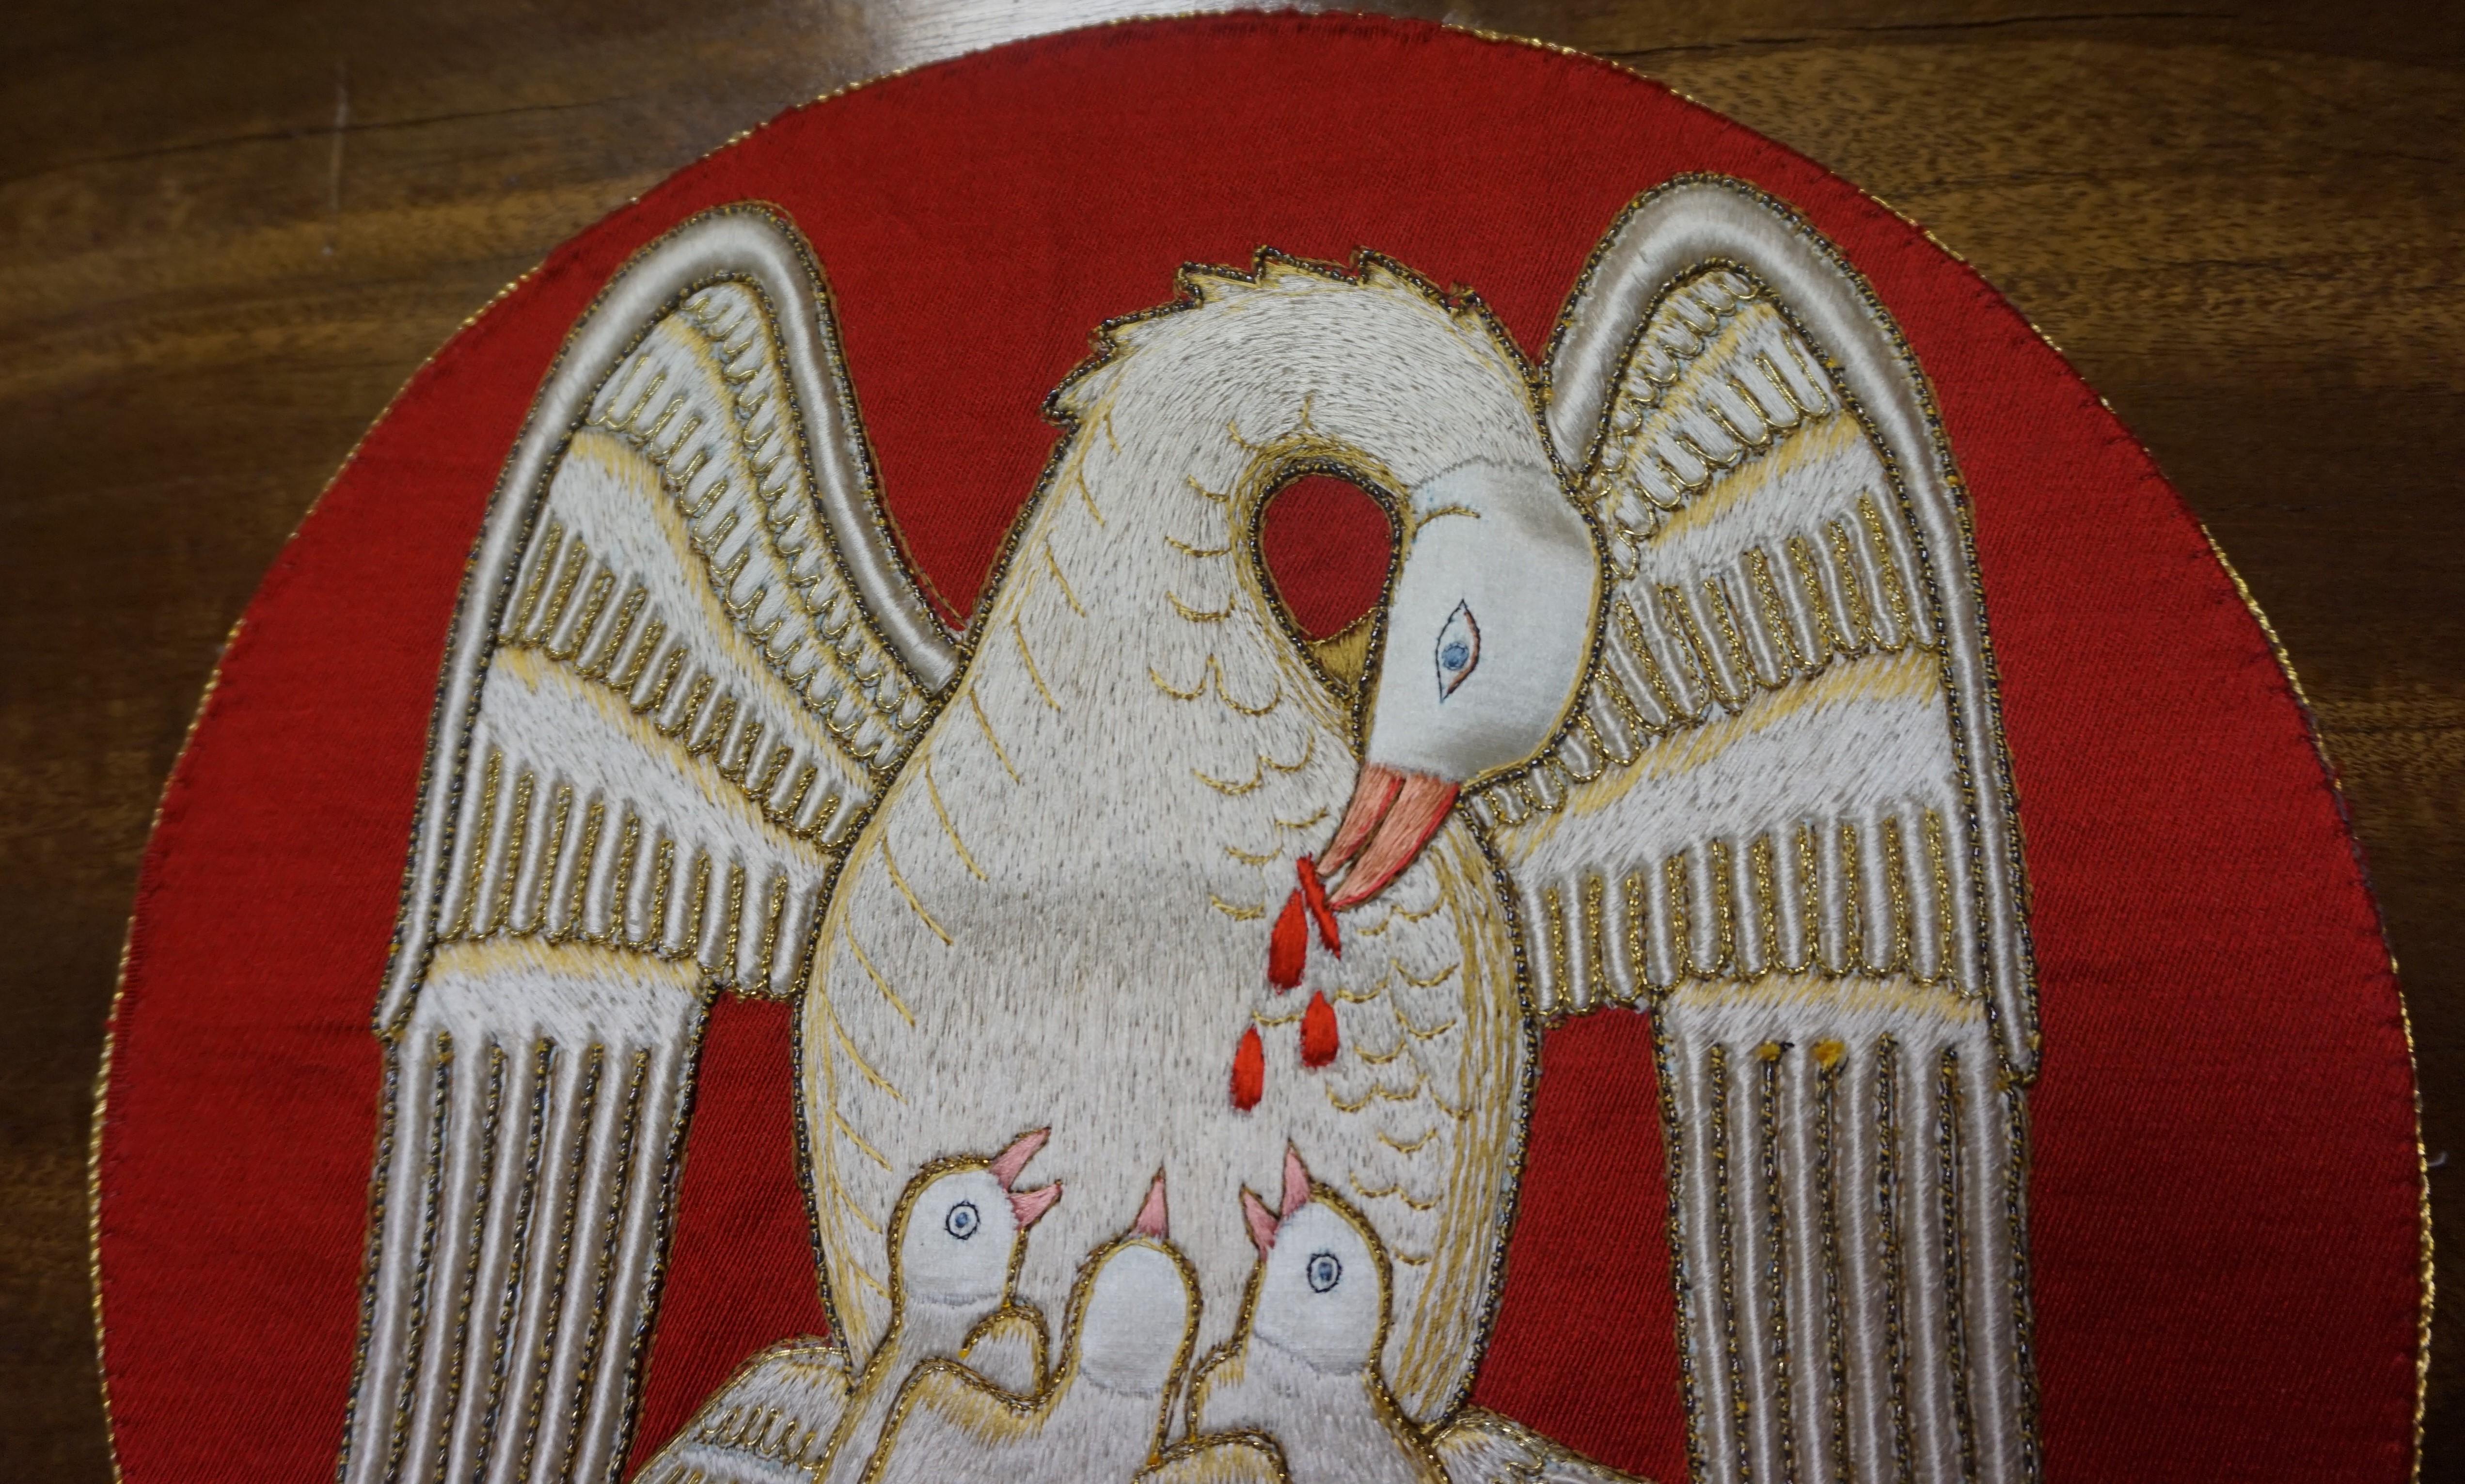 Also from the collection of unique, handcrafted religious artefacts.

This rare and meaningful symbol in Christianity was all handcrafted in the mid-20th century. The perfectly embroidered pelican and babies are made of top quality silk and copper